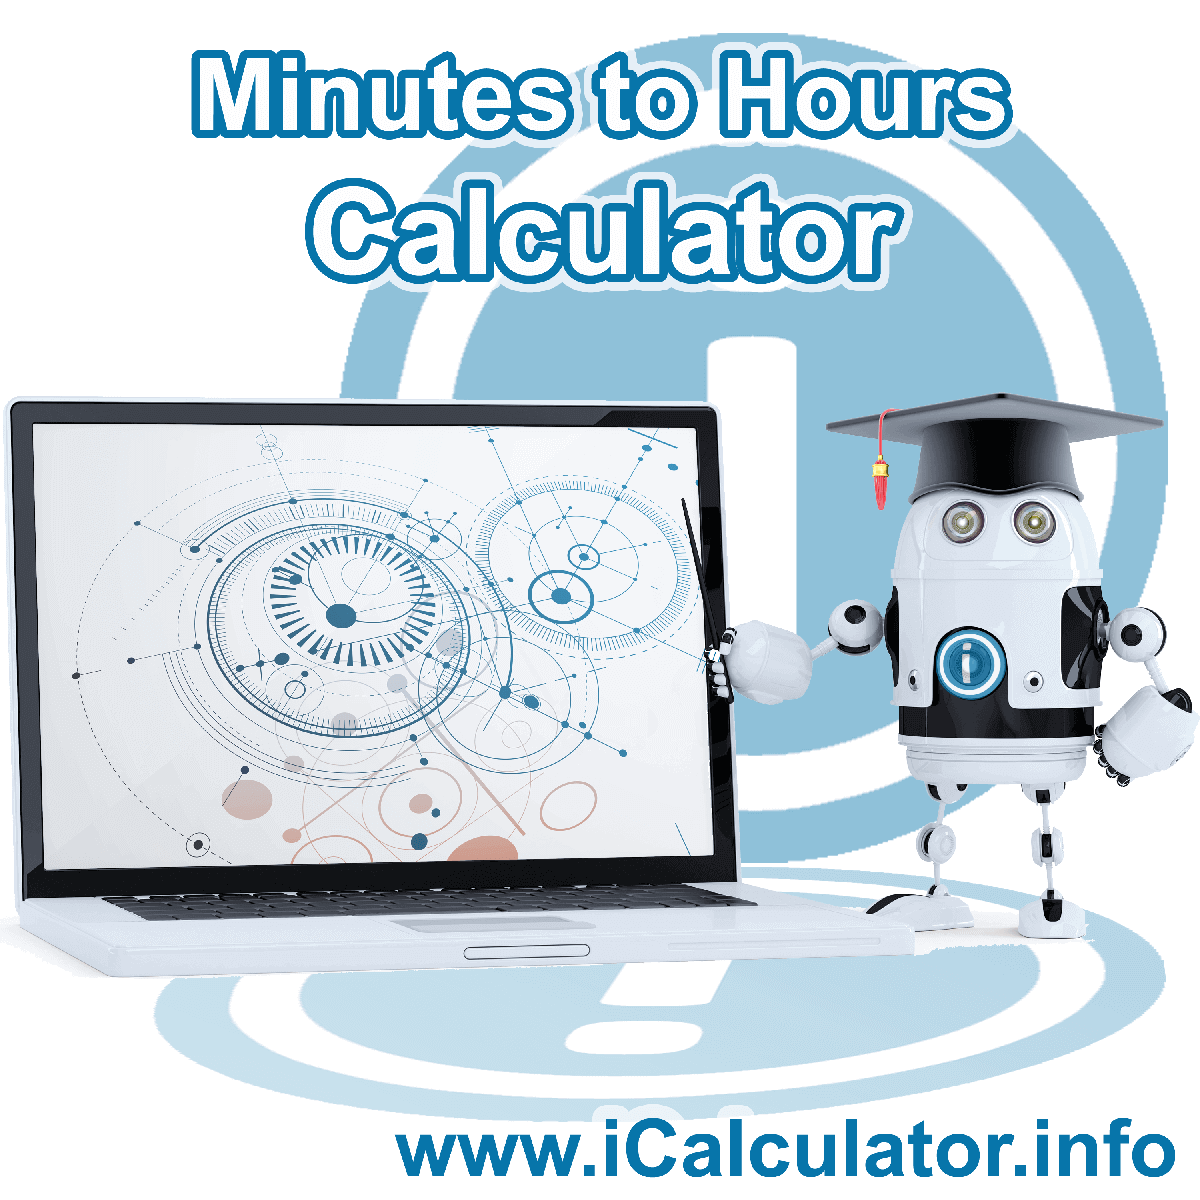 Minutes to Hours Converter Calculator: This image shows Minutes to Hours Conversion Formula with associated calculations used by the Minutes to Hours Converter Calculator